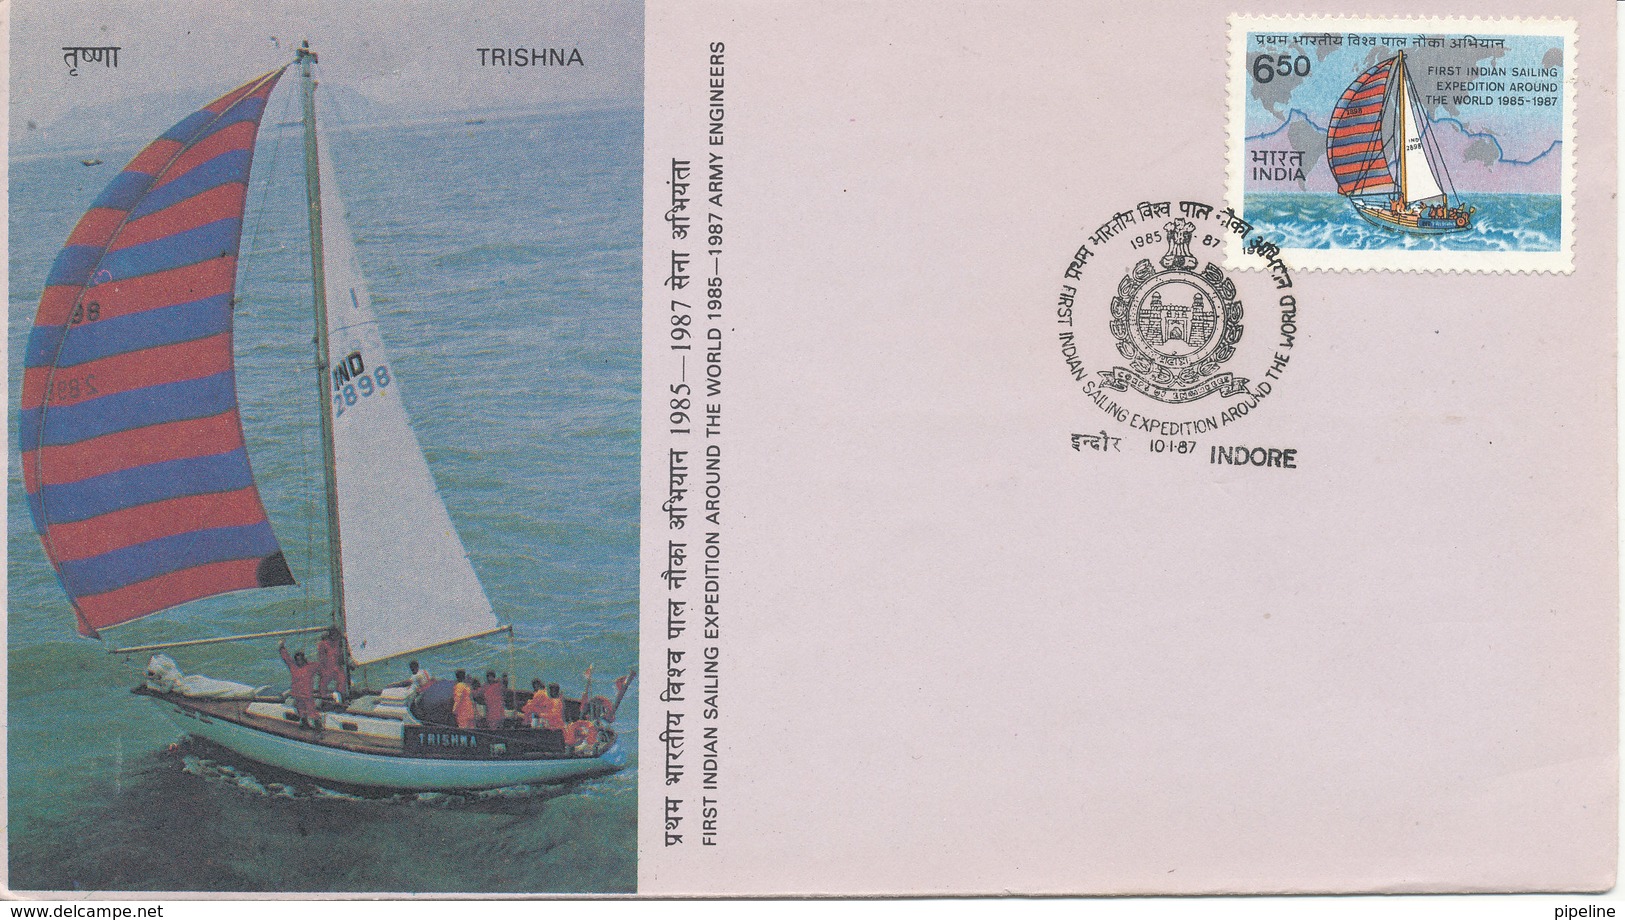 India FDC Indore 10-1-1987 First Indian Sailing Expedition Around The World With Cachet - FDC